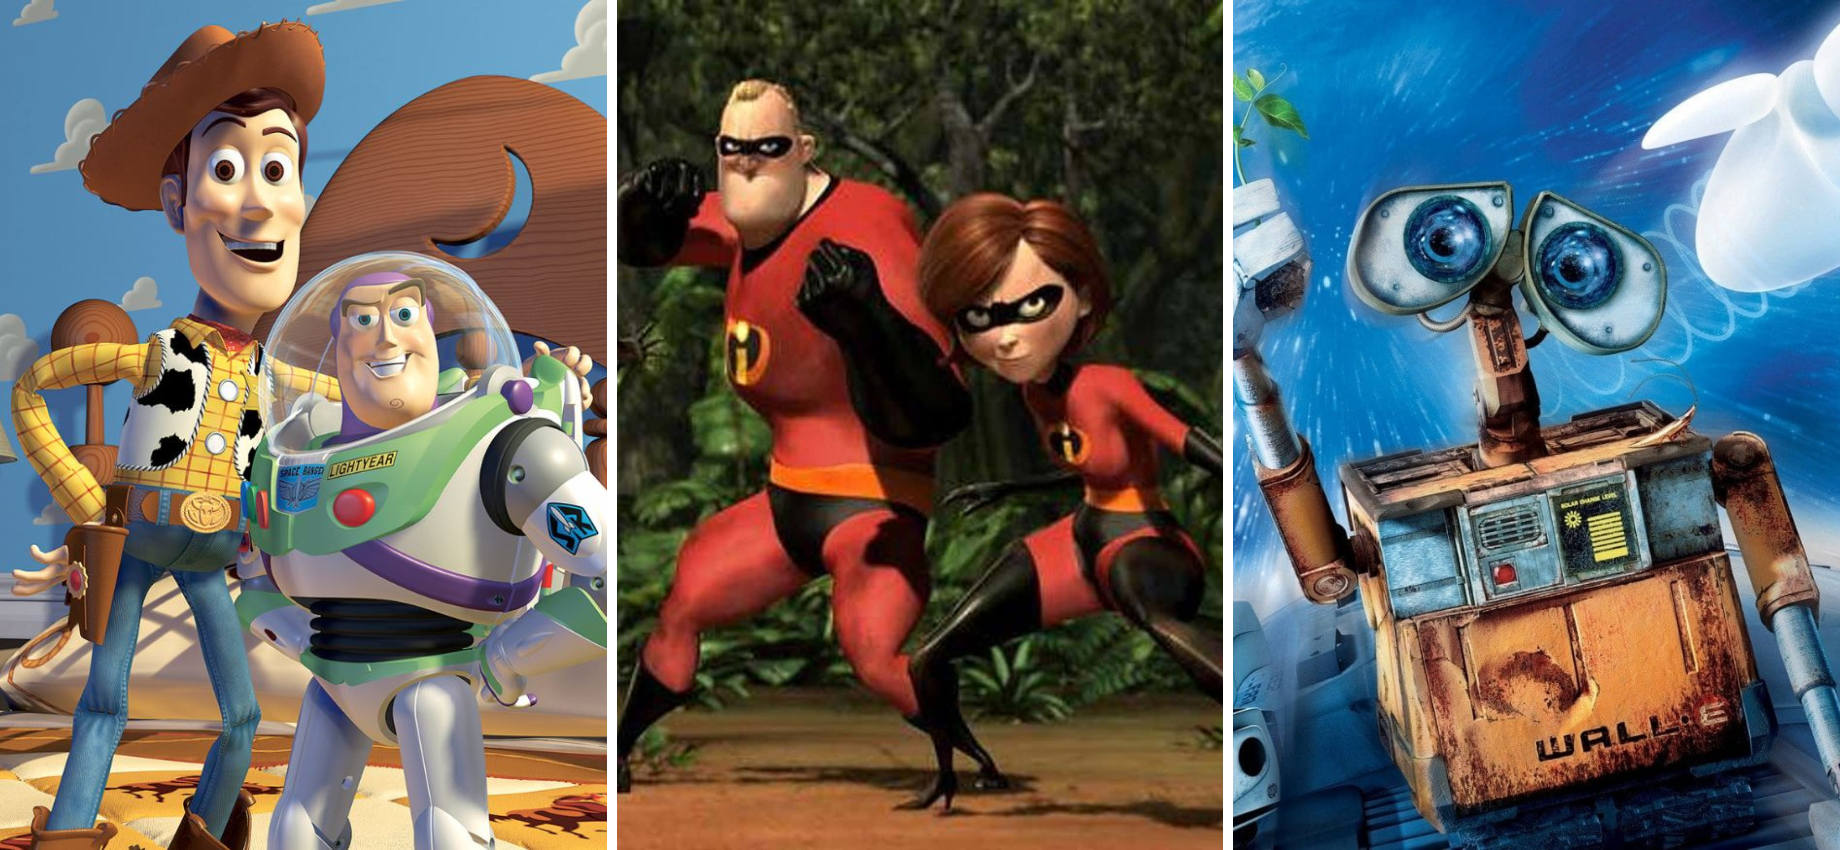 Images from Toy Story, The Incredibles, and WALL-E. Courtesy of Pixar and Disney.